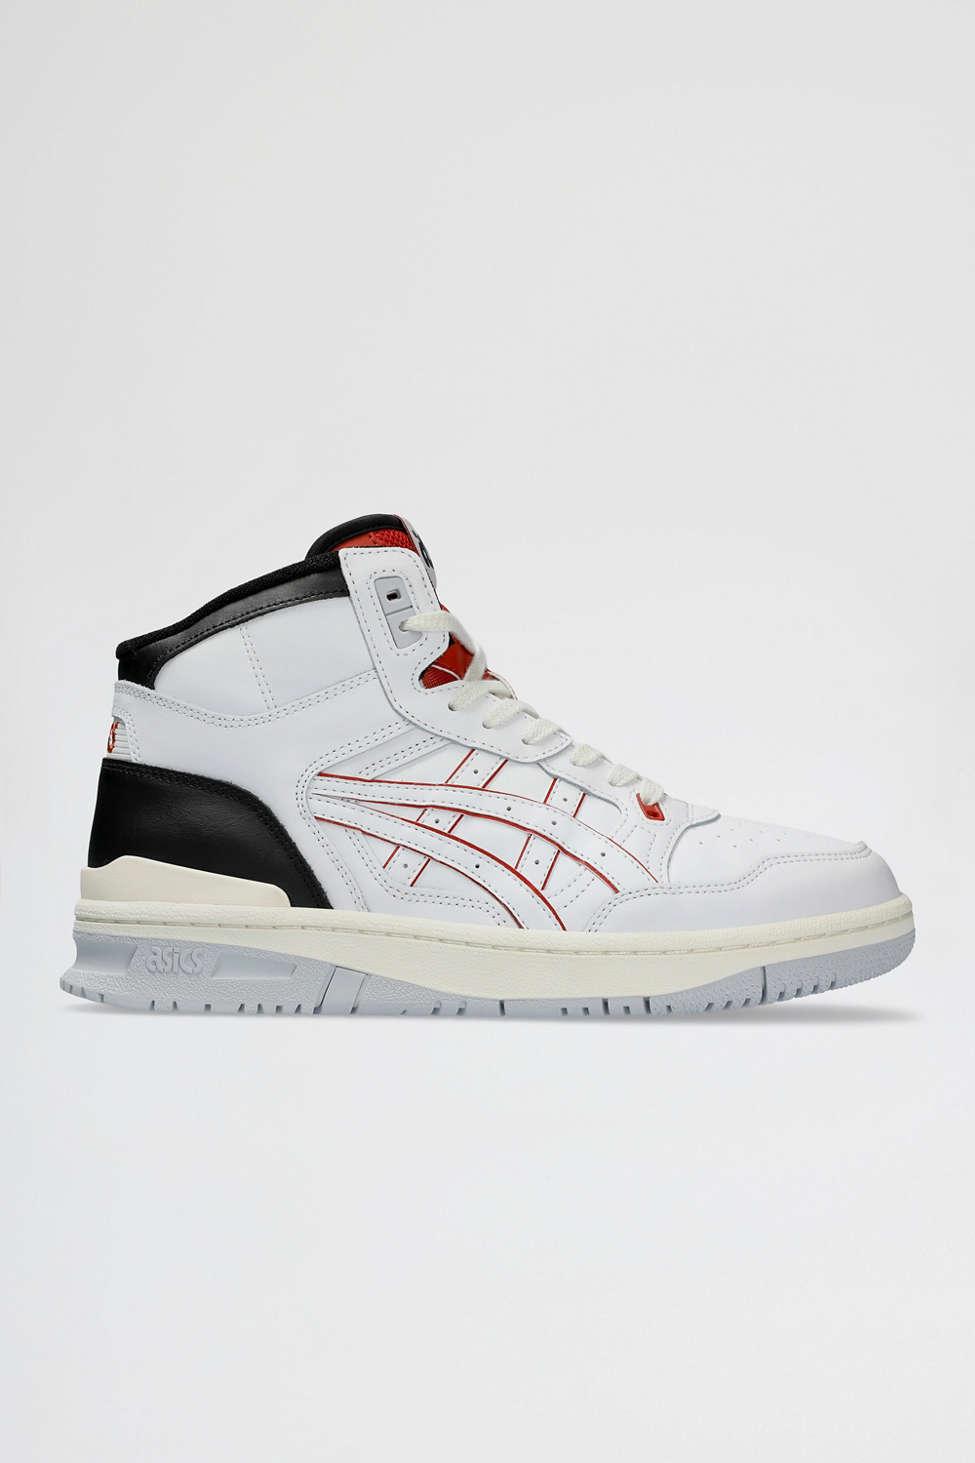 Asics Ex89 Mt Sportstyle Sneakers in White | Lyst